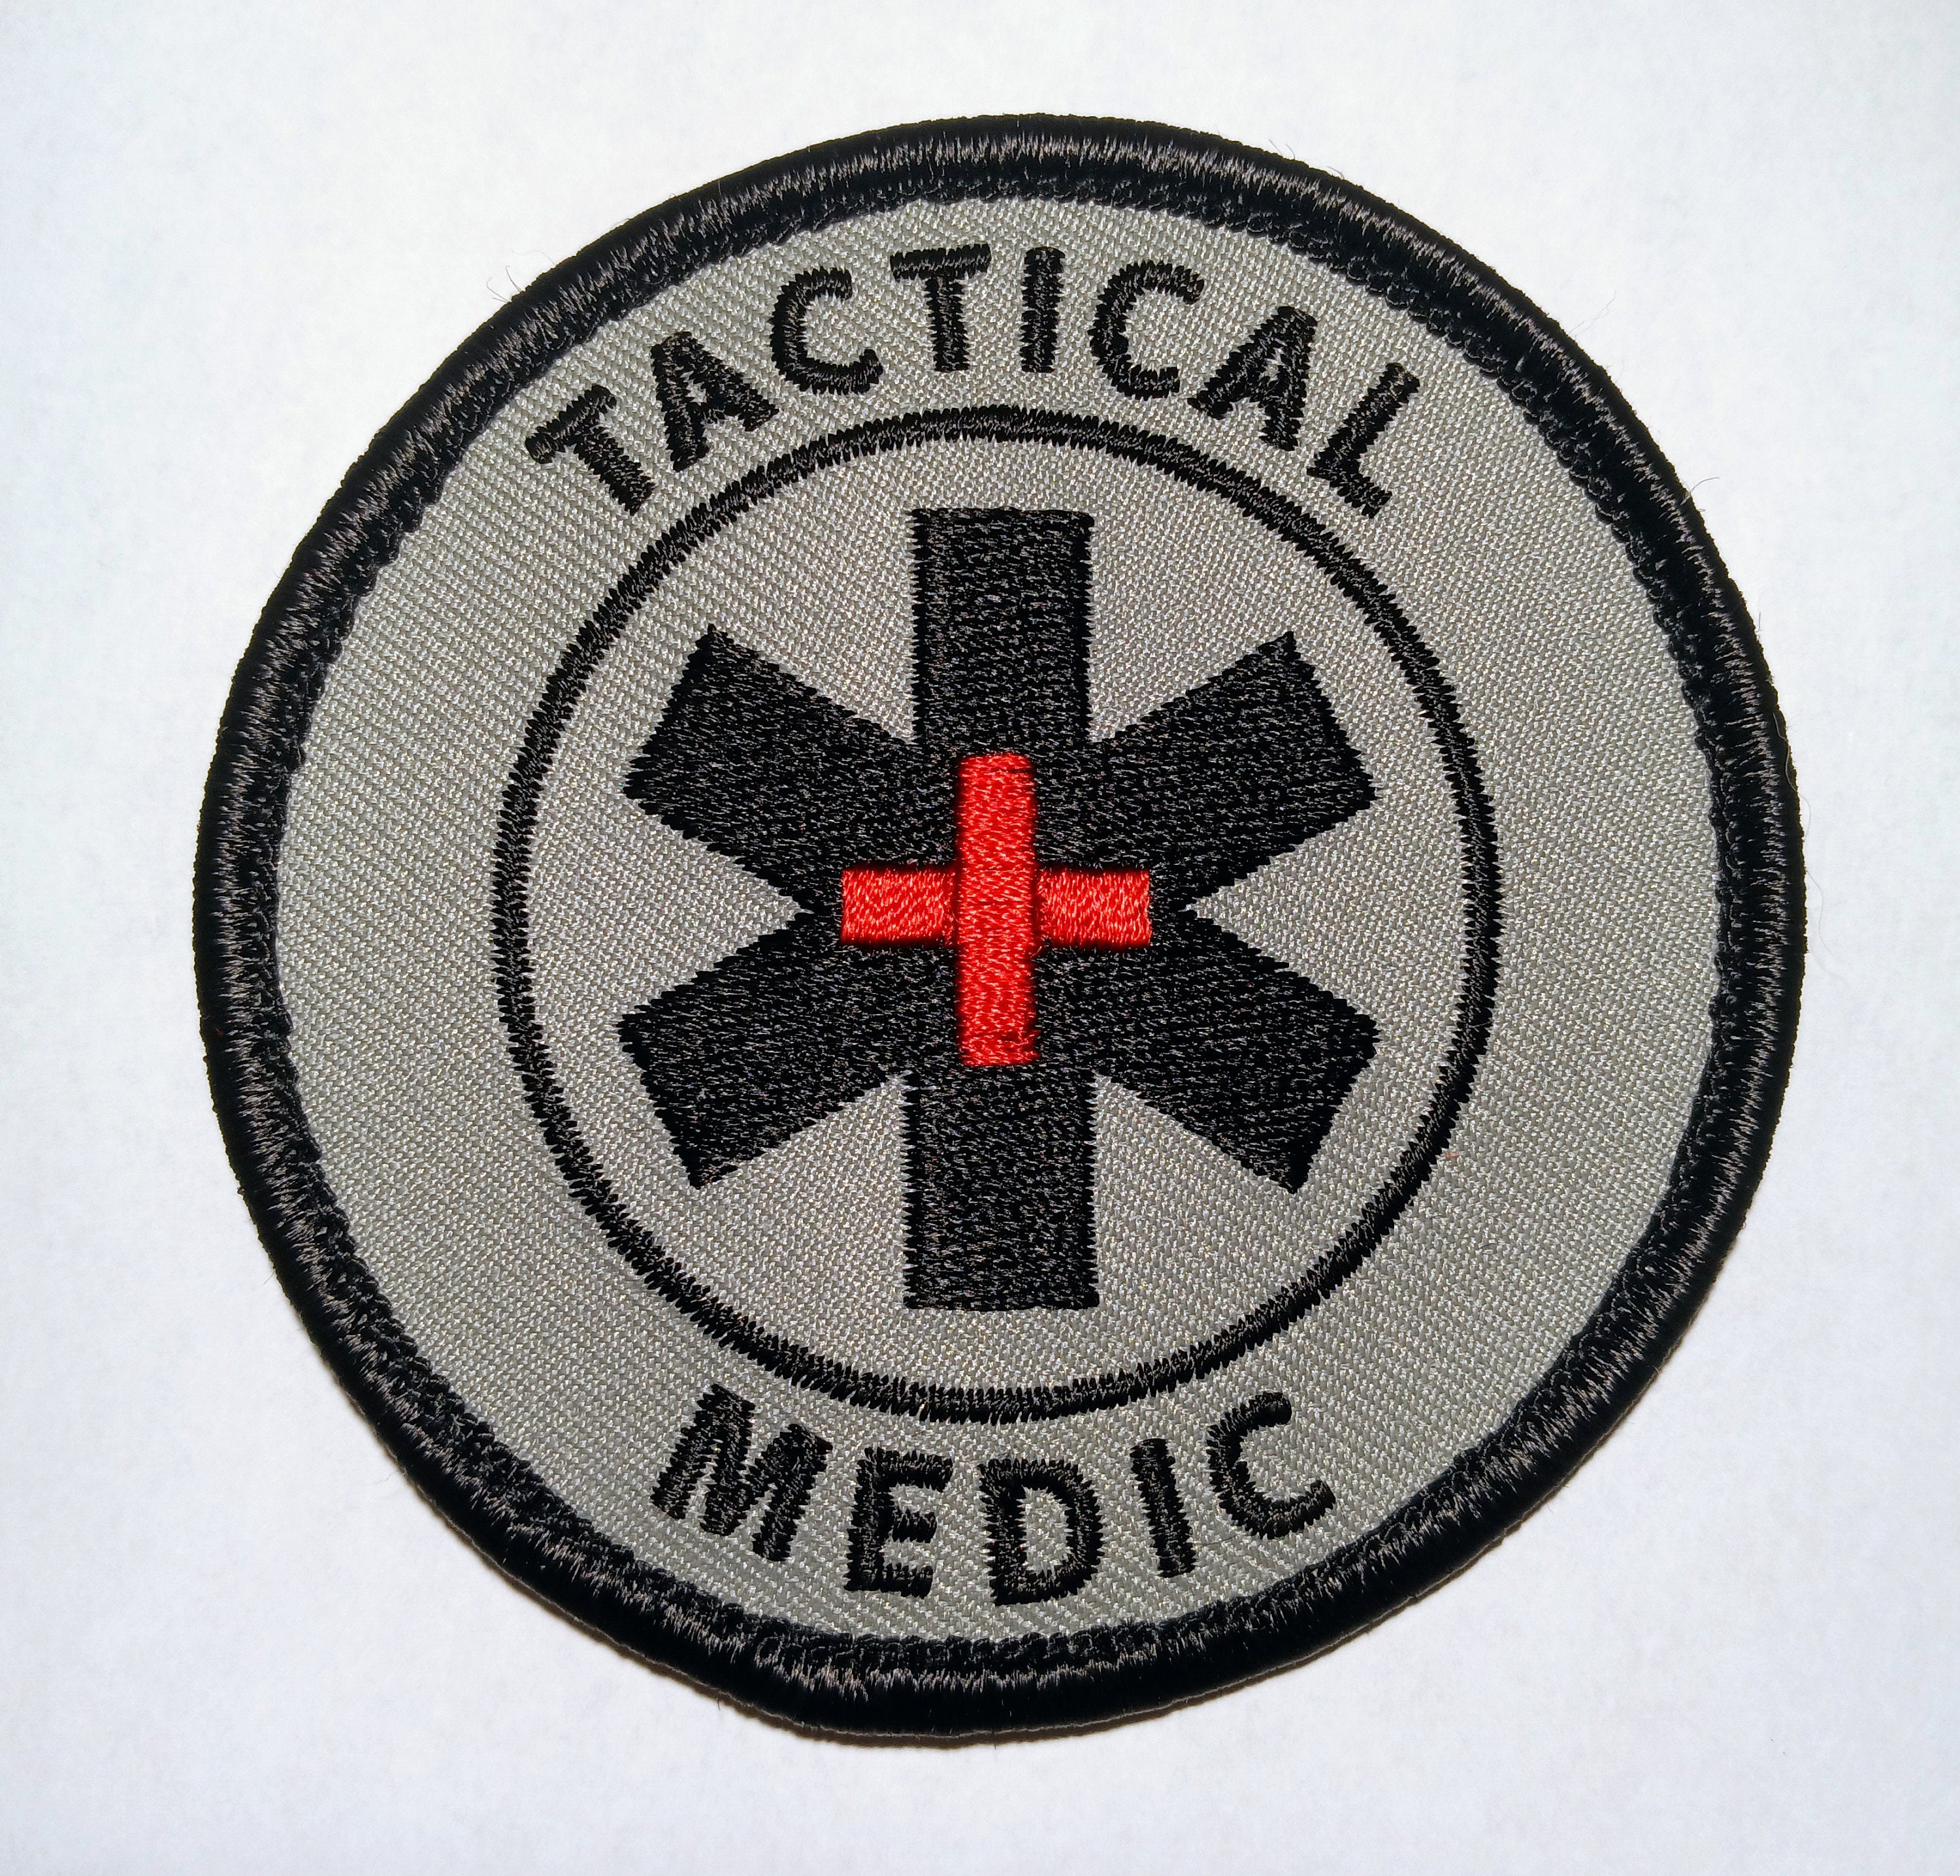 Patches  National Registry of Emergency Medical Technicians